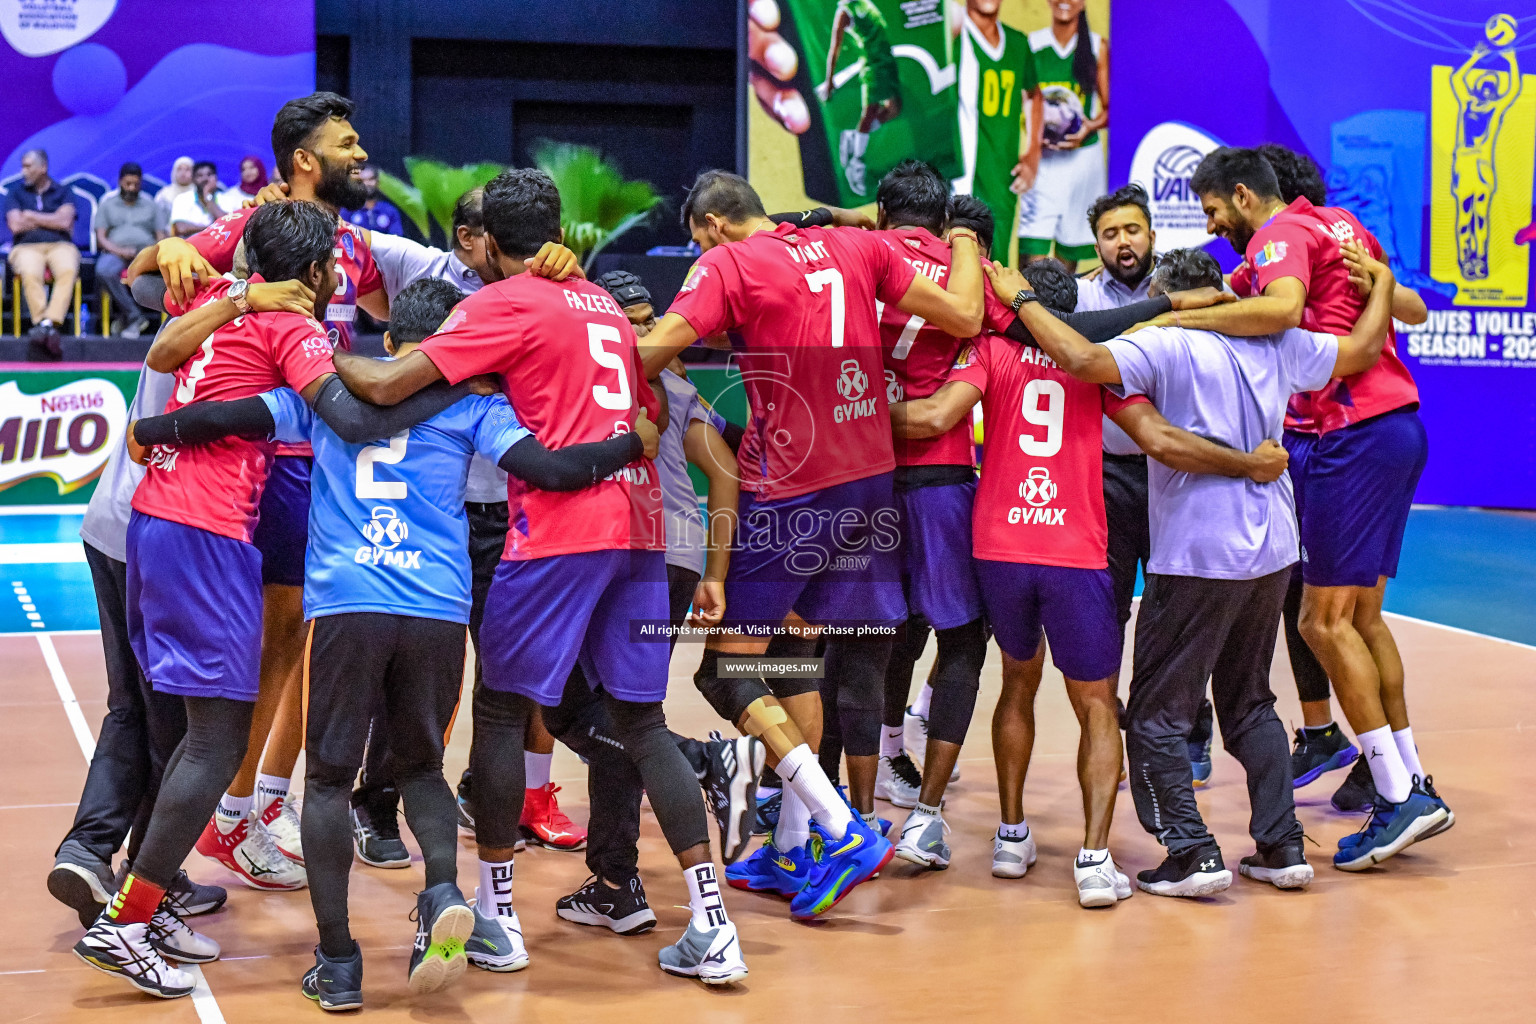 Milo National Volleyball League 2022 Final of Men's Division held on 02 July 2022 in Social Center, Male', Maldives photos by Nausham Waheed